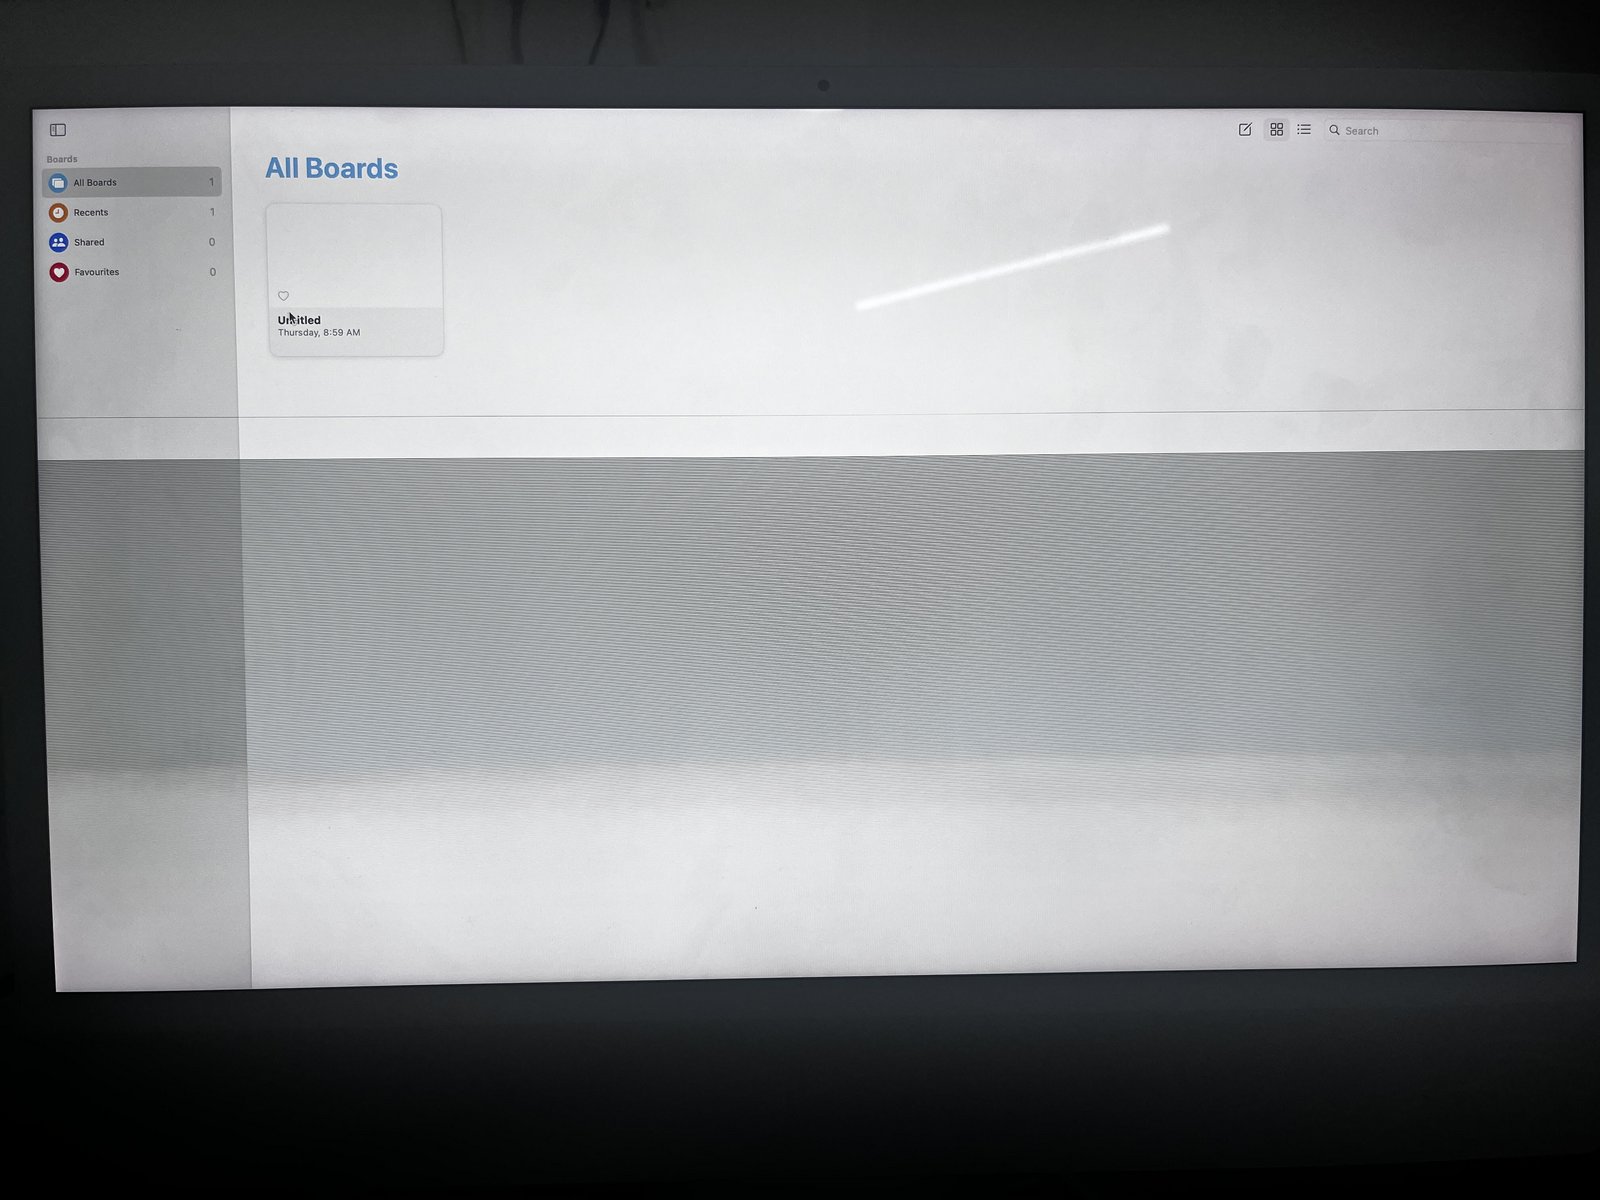 Some M1 iMac models appear to sit off-center due to manufacturing flaw